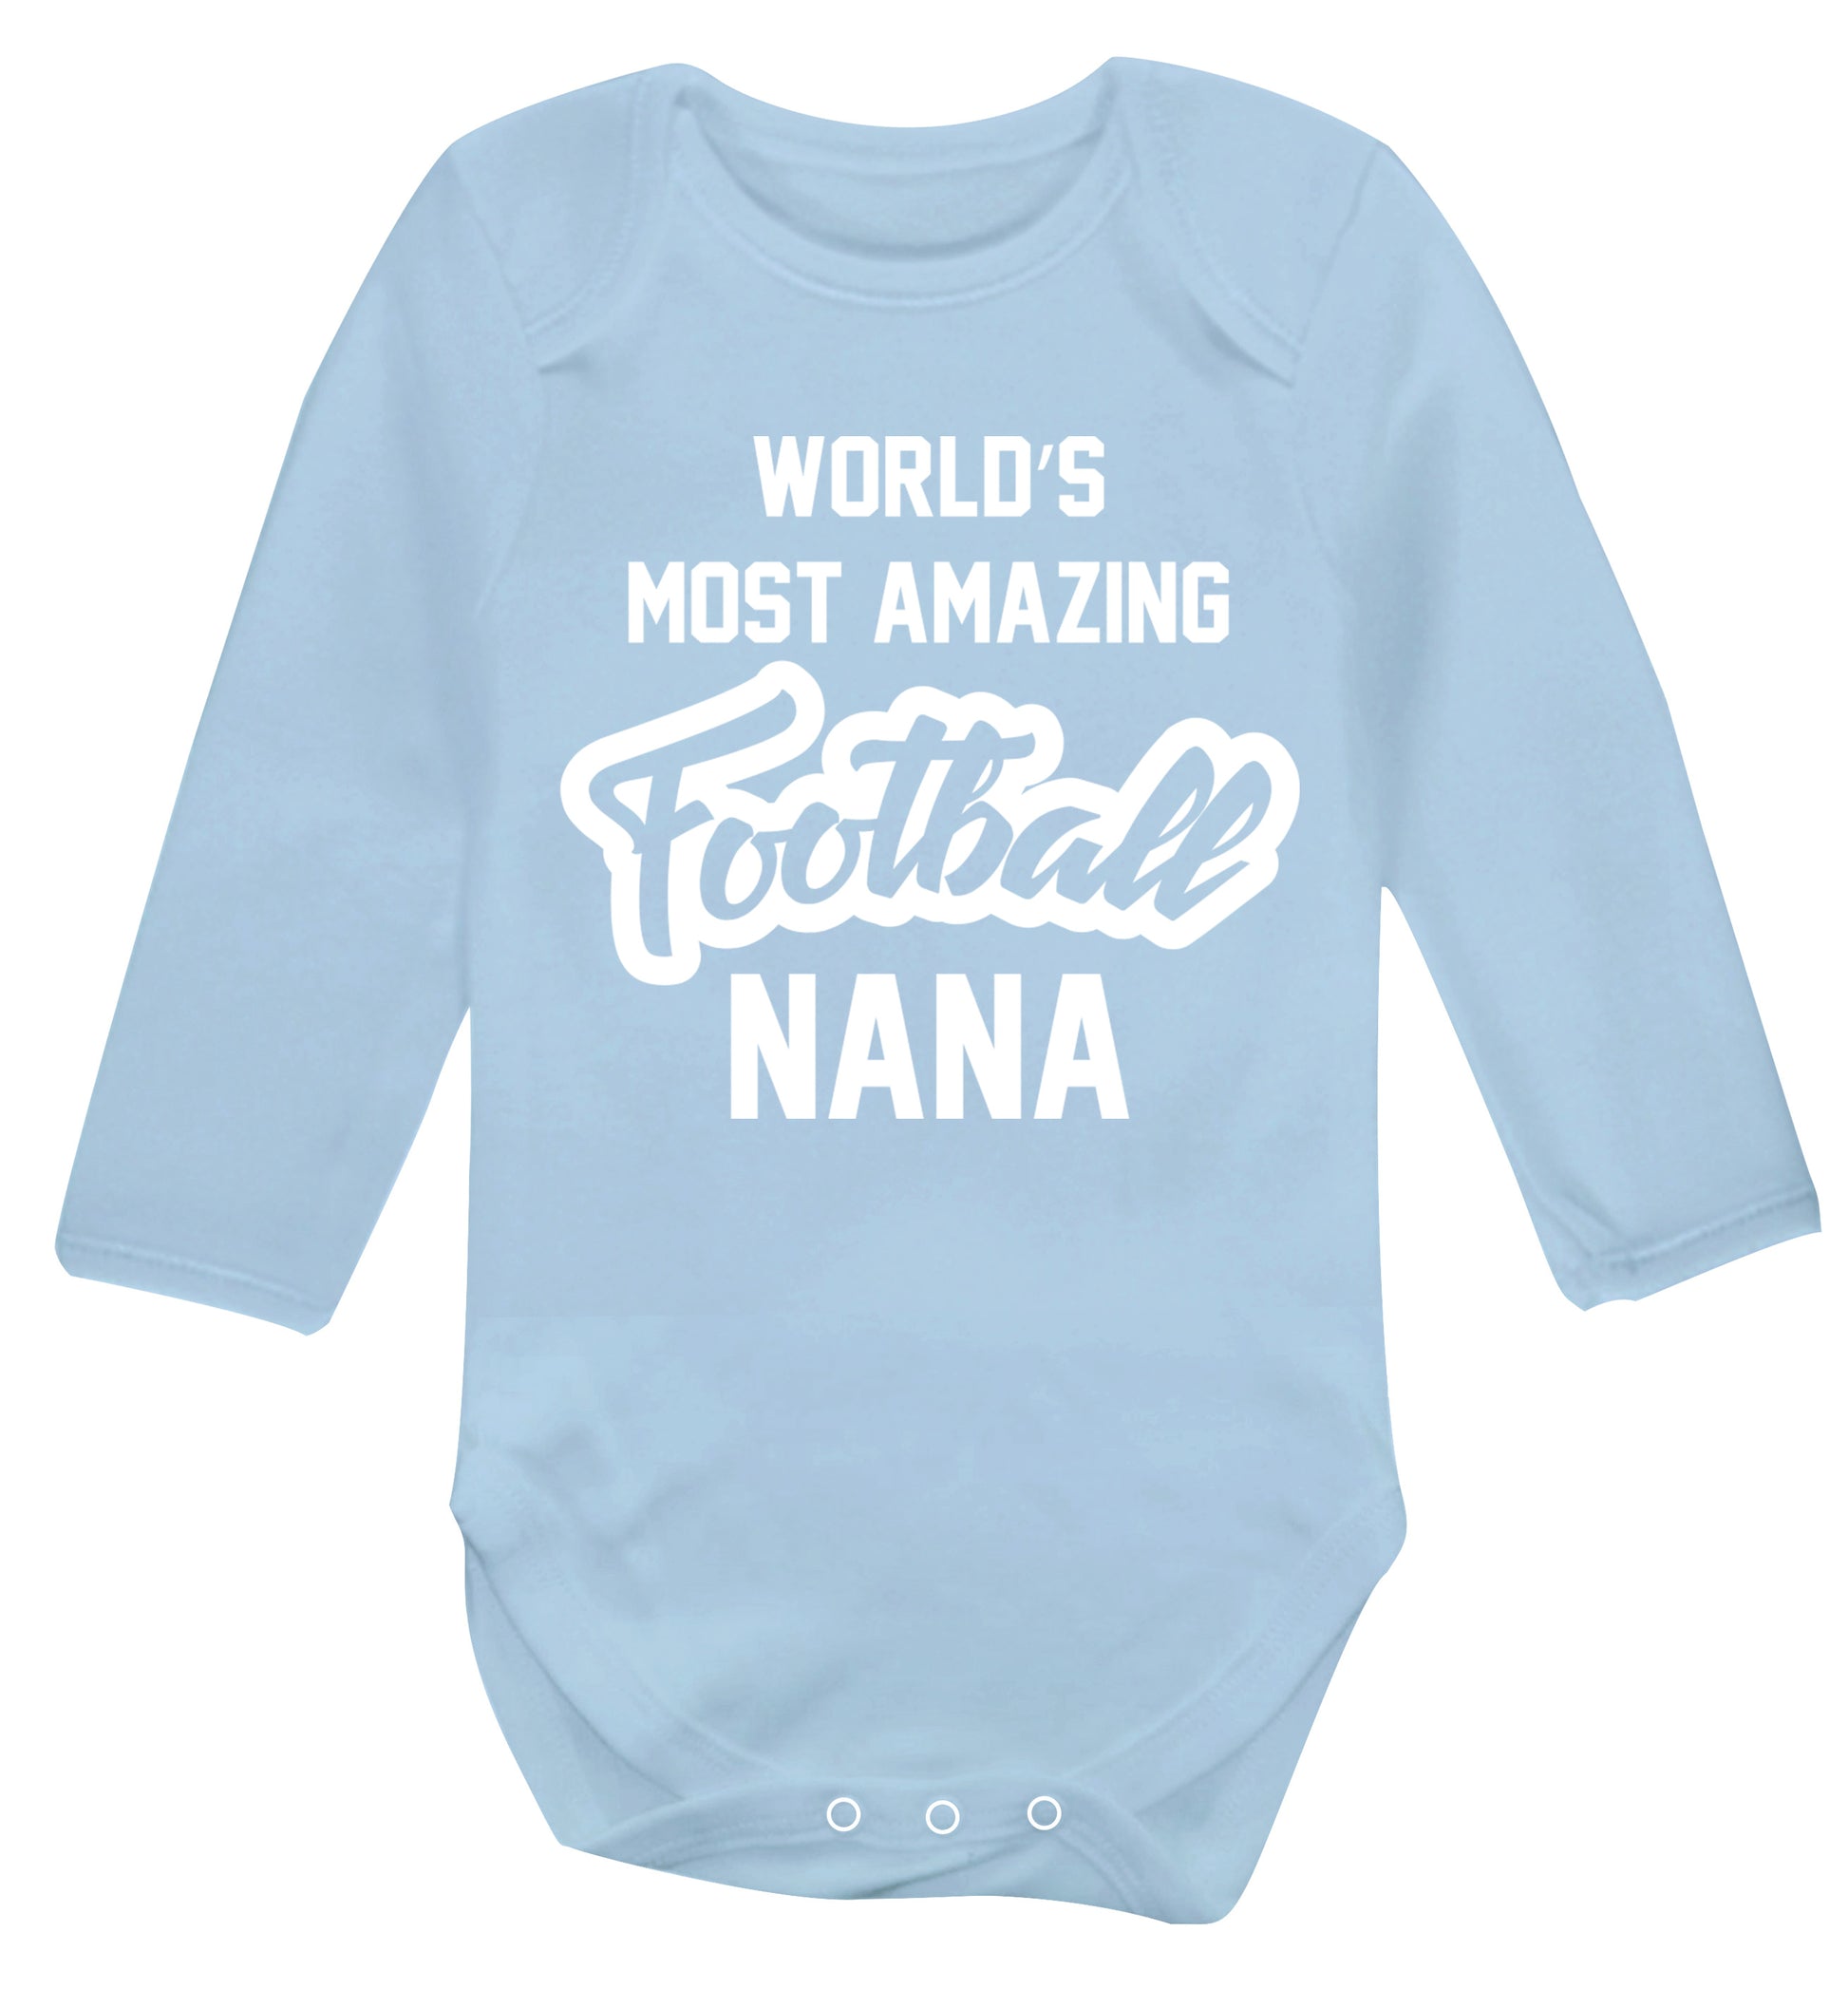 Worlds most amazing football nana Baby Vest long sleeved pale blue 6-12 months